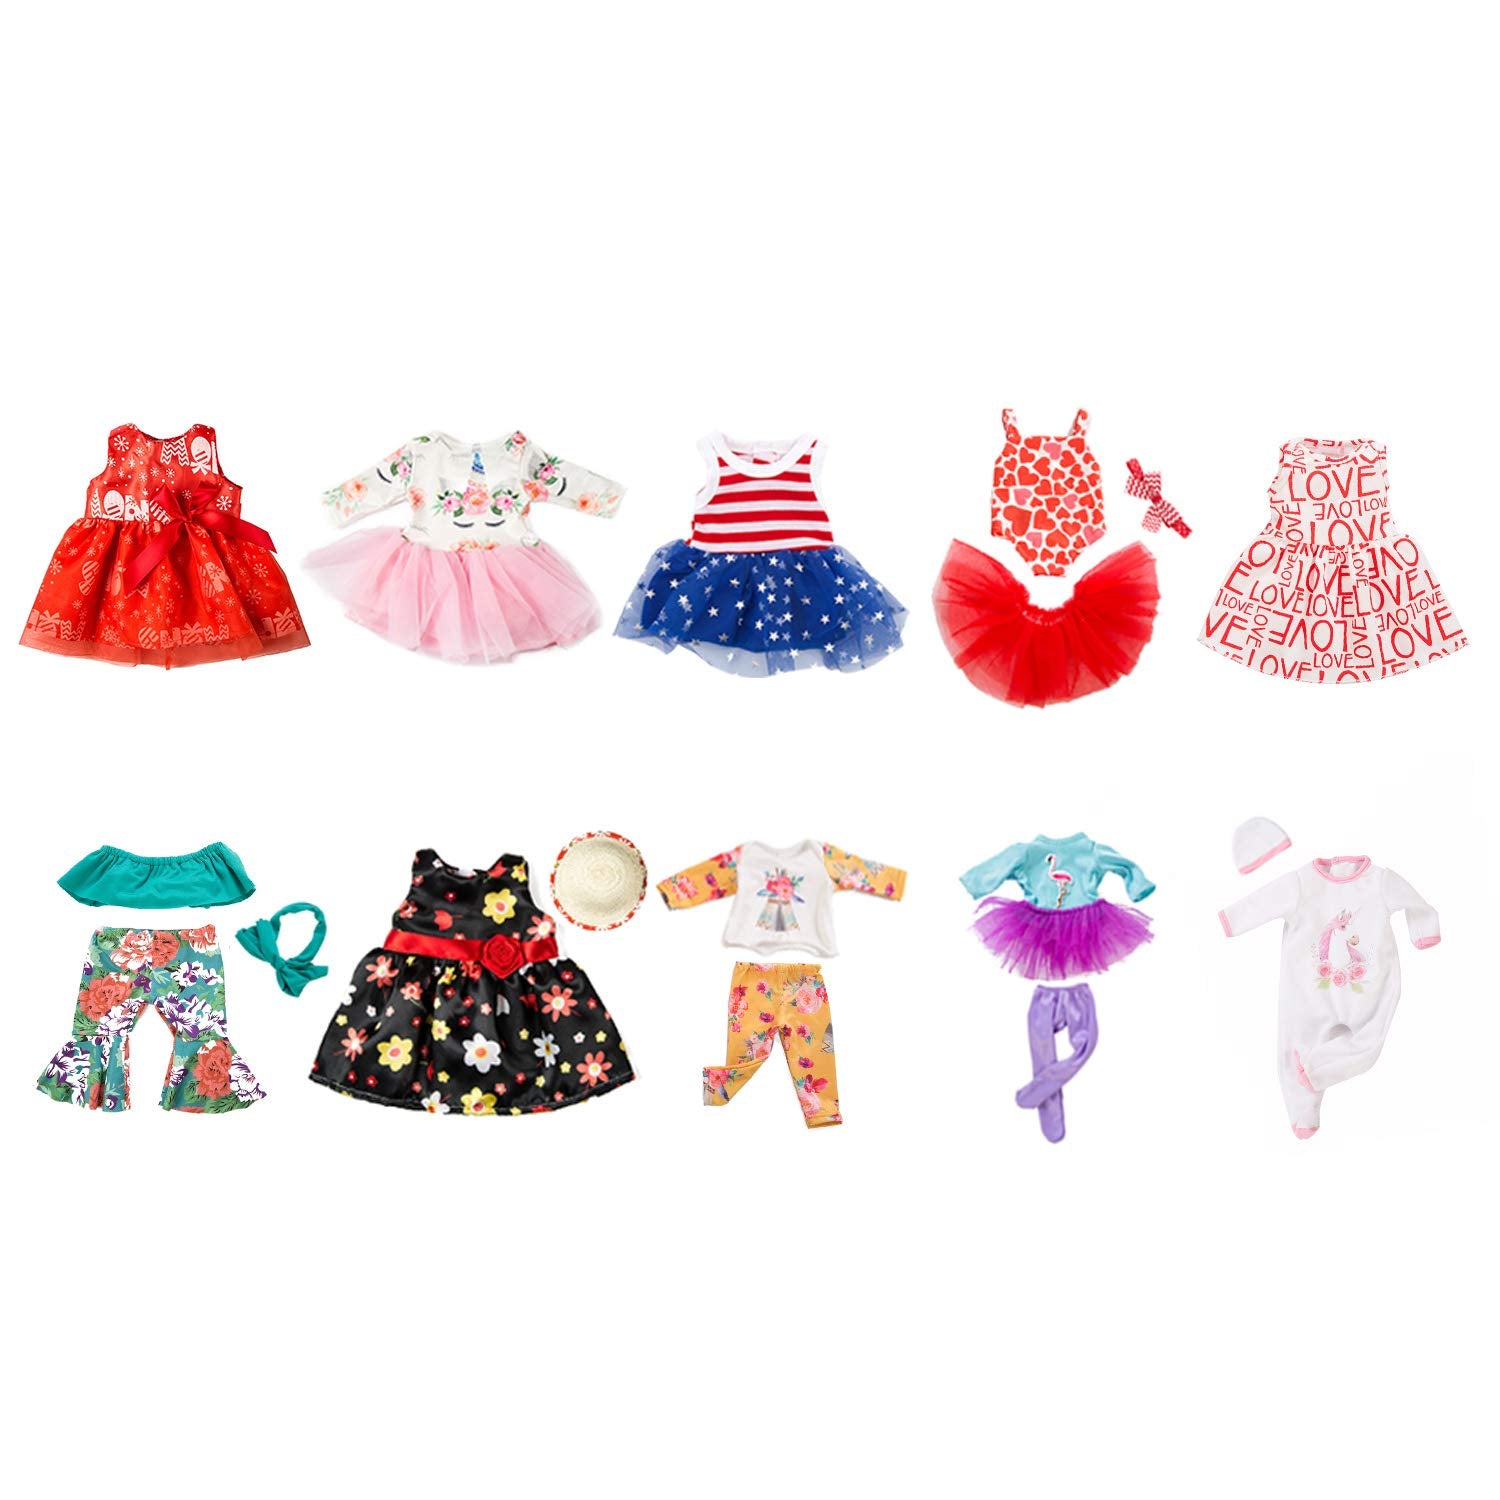 ZQDOLL 19 pcs Girl Doll Clothes Gift for American 18 inch Doll Clothes and Accessories, Including 10 Complete Sets of Clothing